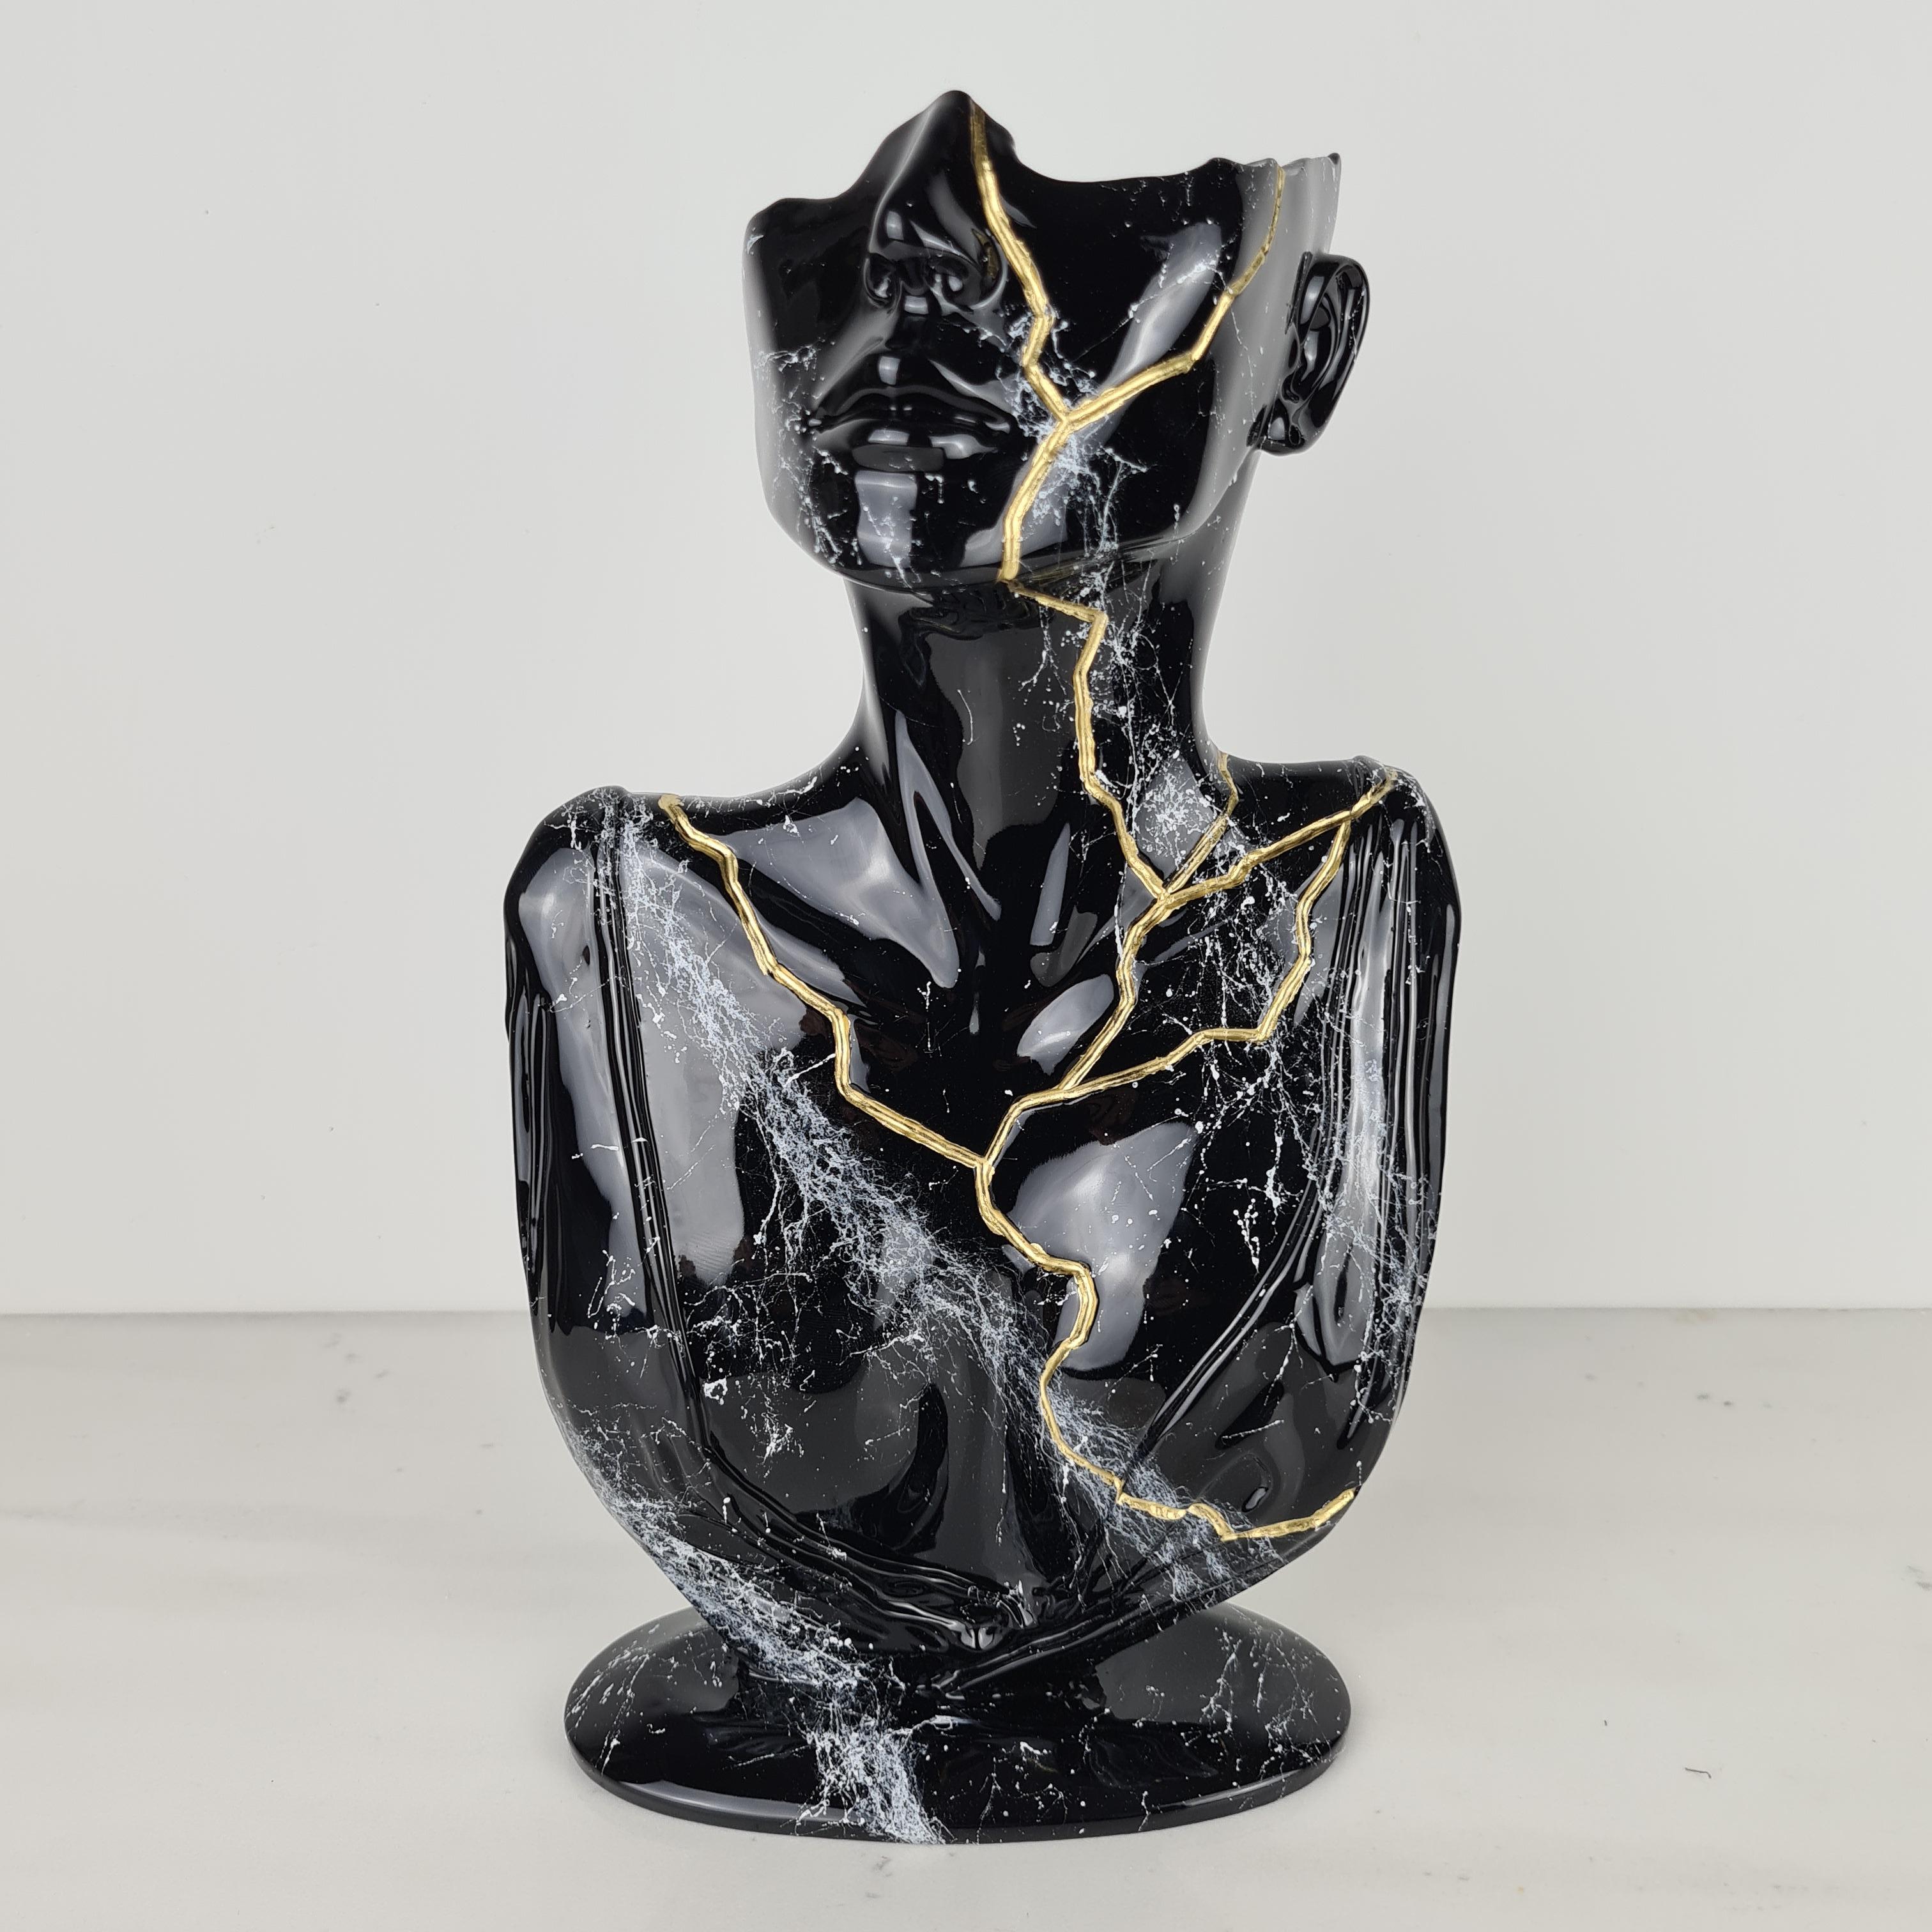 Born in 1992 in Macerata in the Marche region, the Italian artist carried out a path that between studies of Surveyor and Architecture led him to a long collaboration with a craft company in
resin. In close contact with sculptures and design